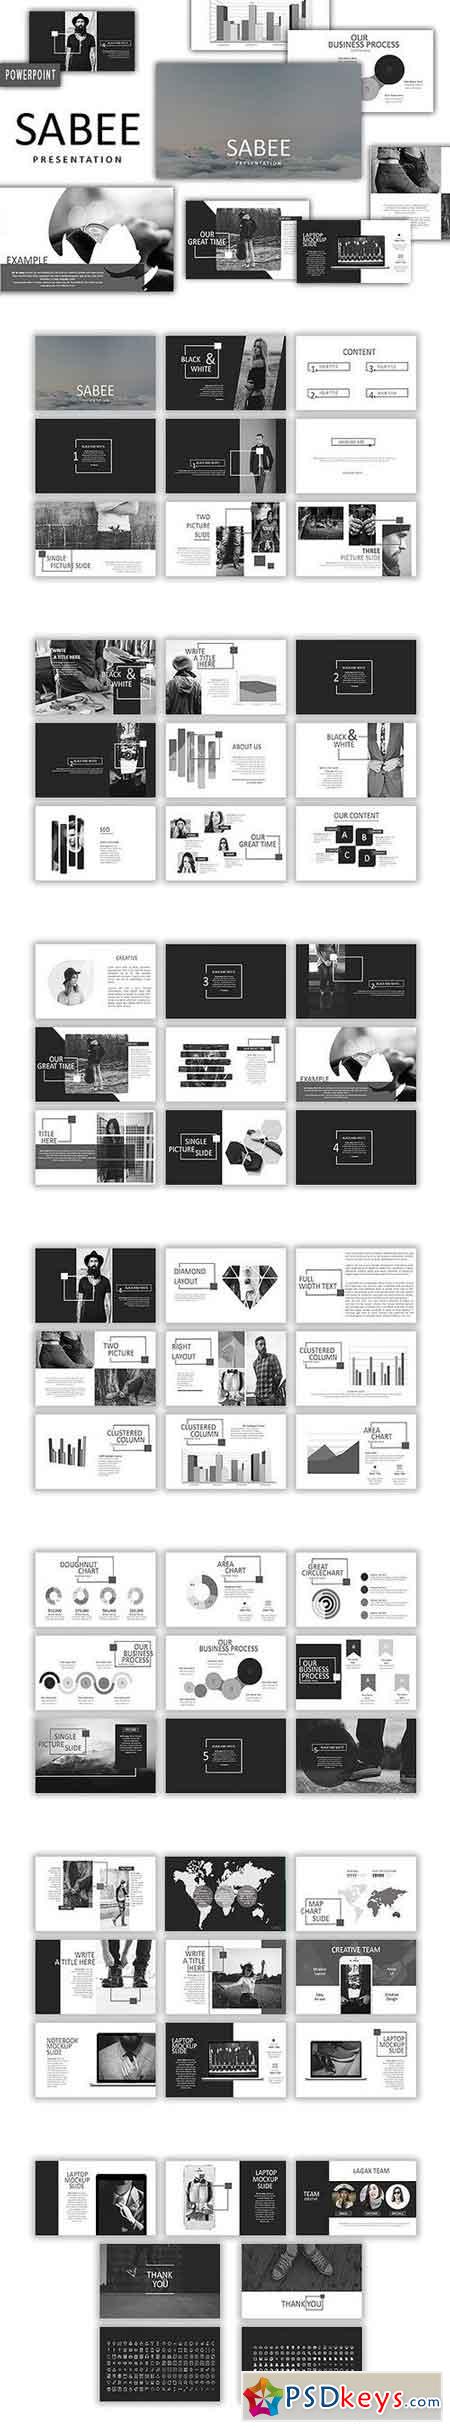 Sabee Powerpoint Template 1521383